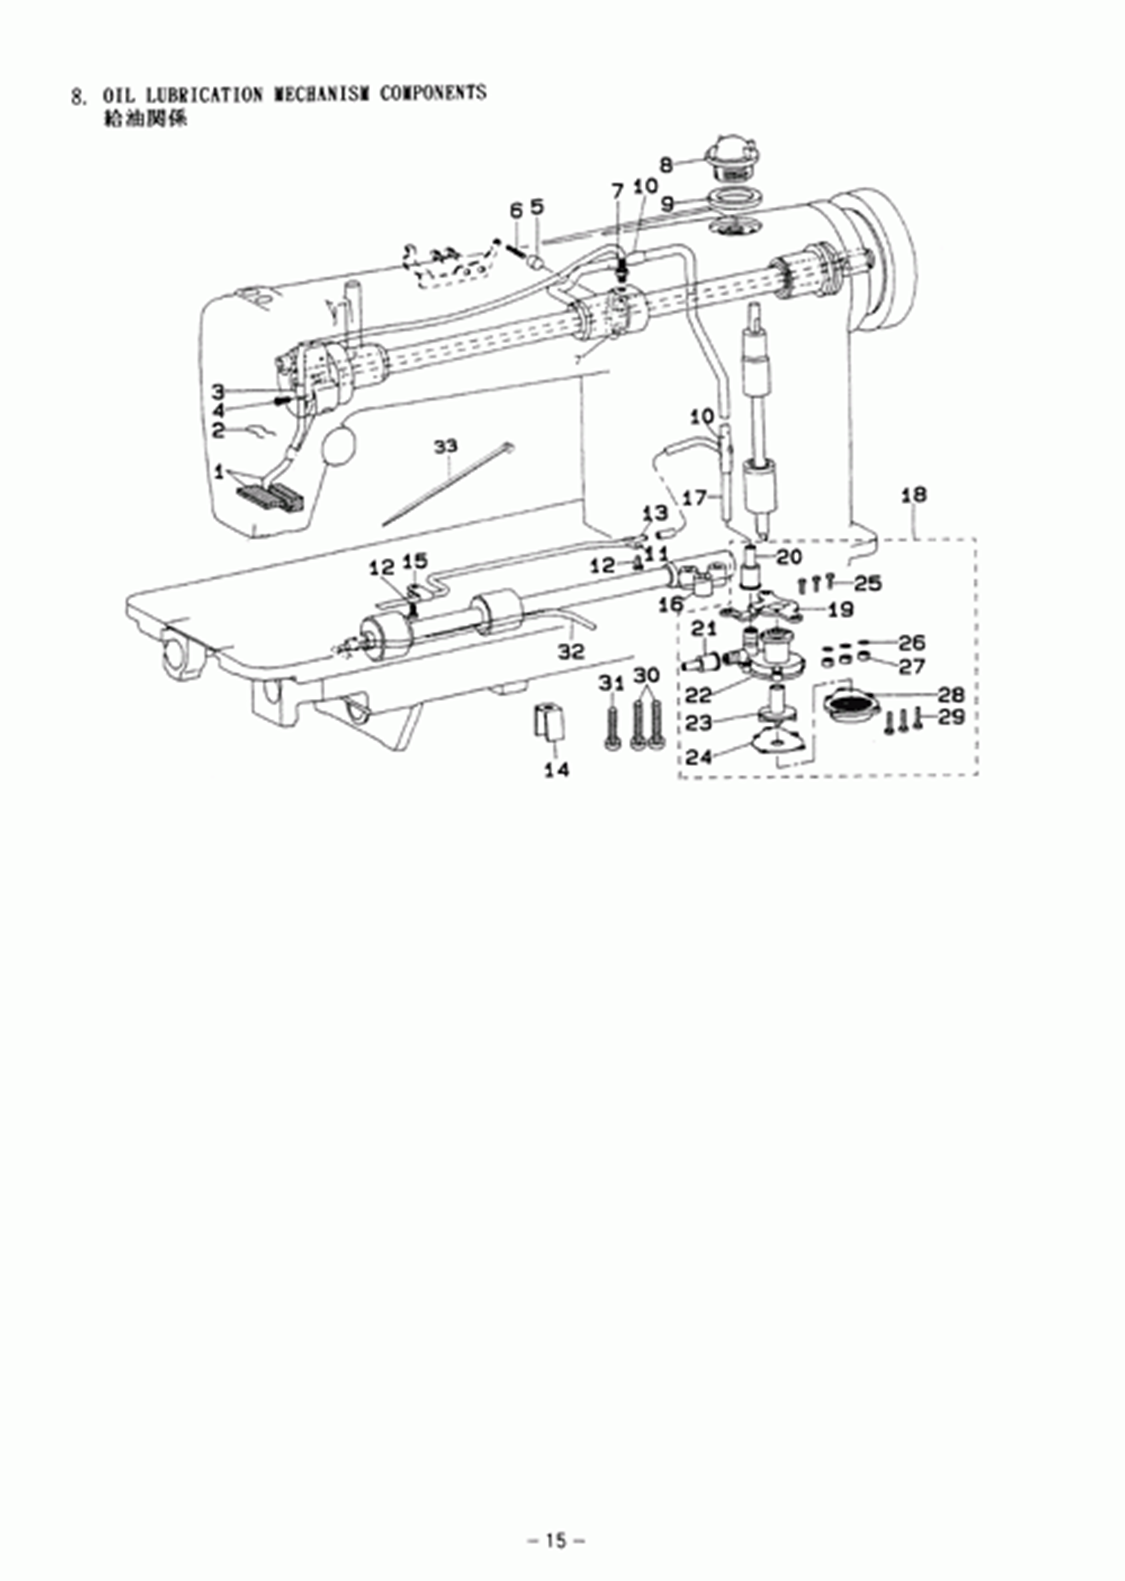 MH-382 - 8. OIL LUBRICATION MECHANISM COMPONENTS